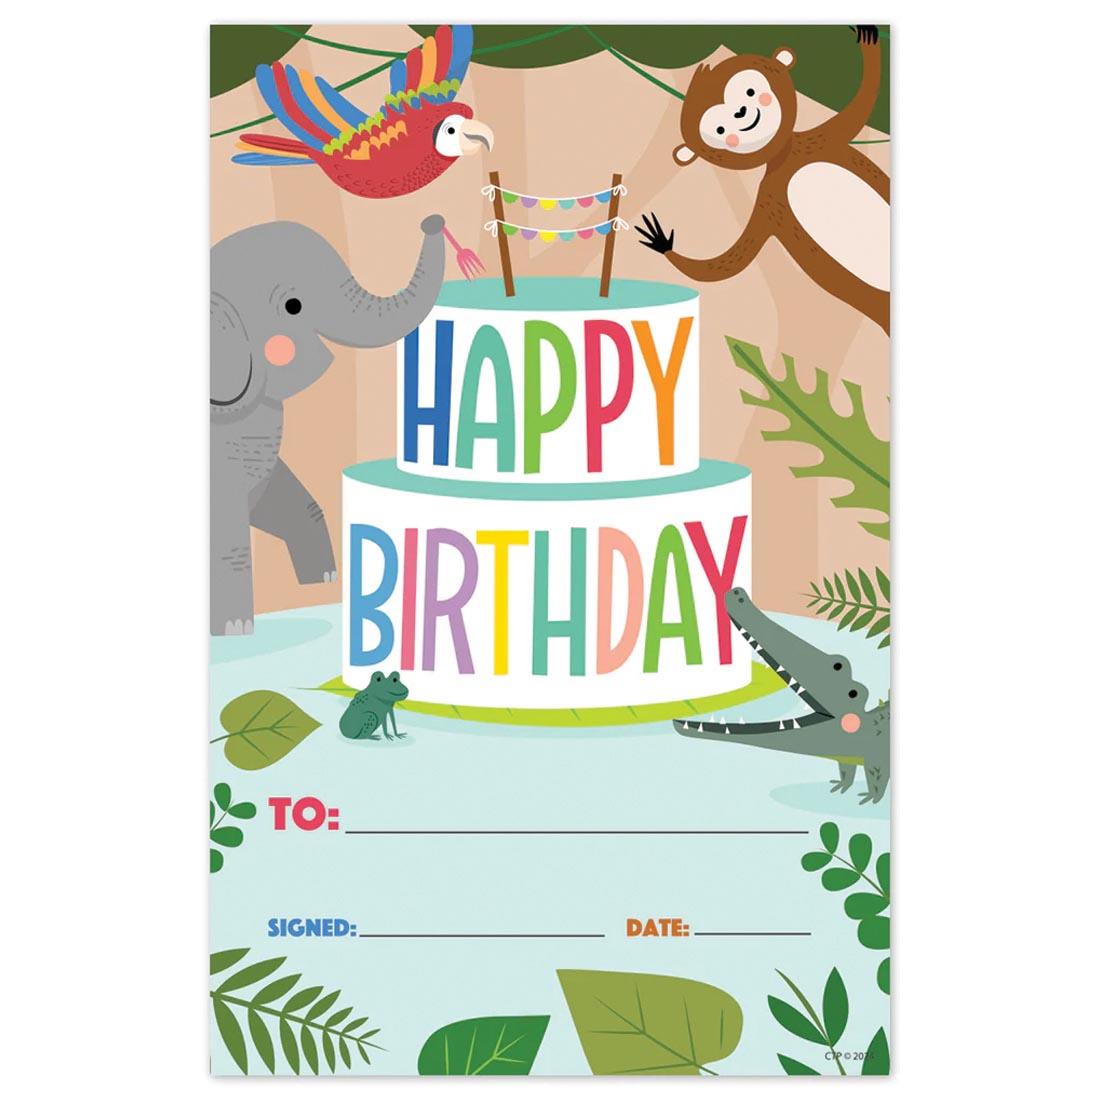 Happy Birthday Award from the Jungle Friends collection by Creative Teaching Press